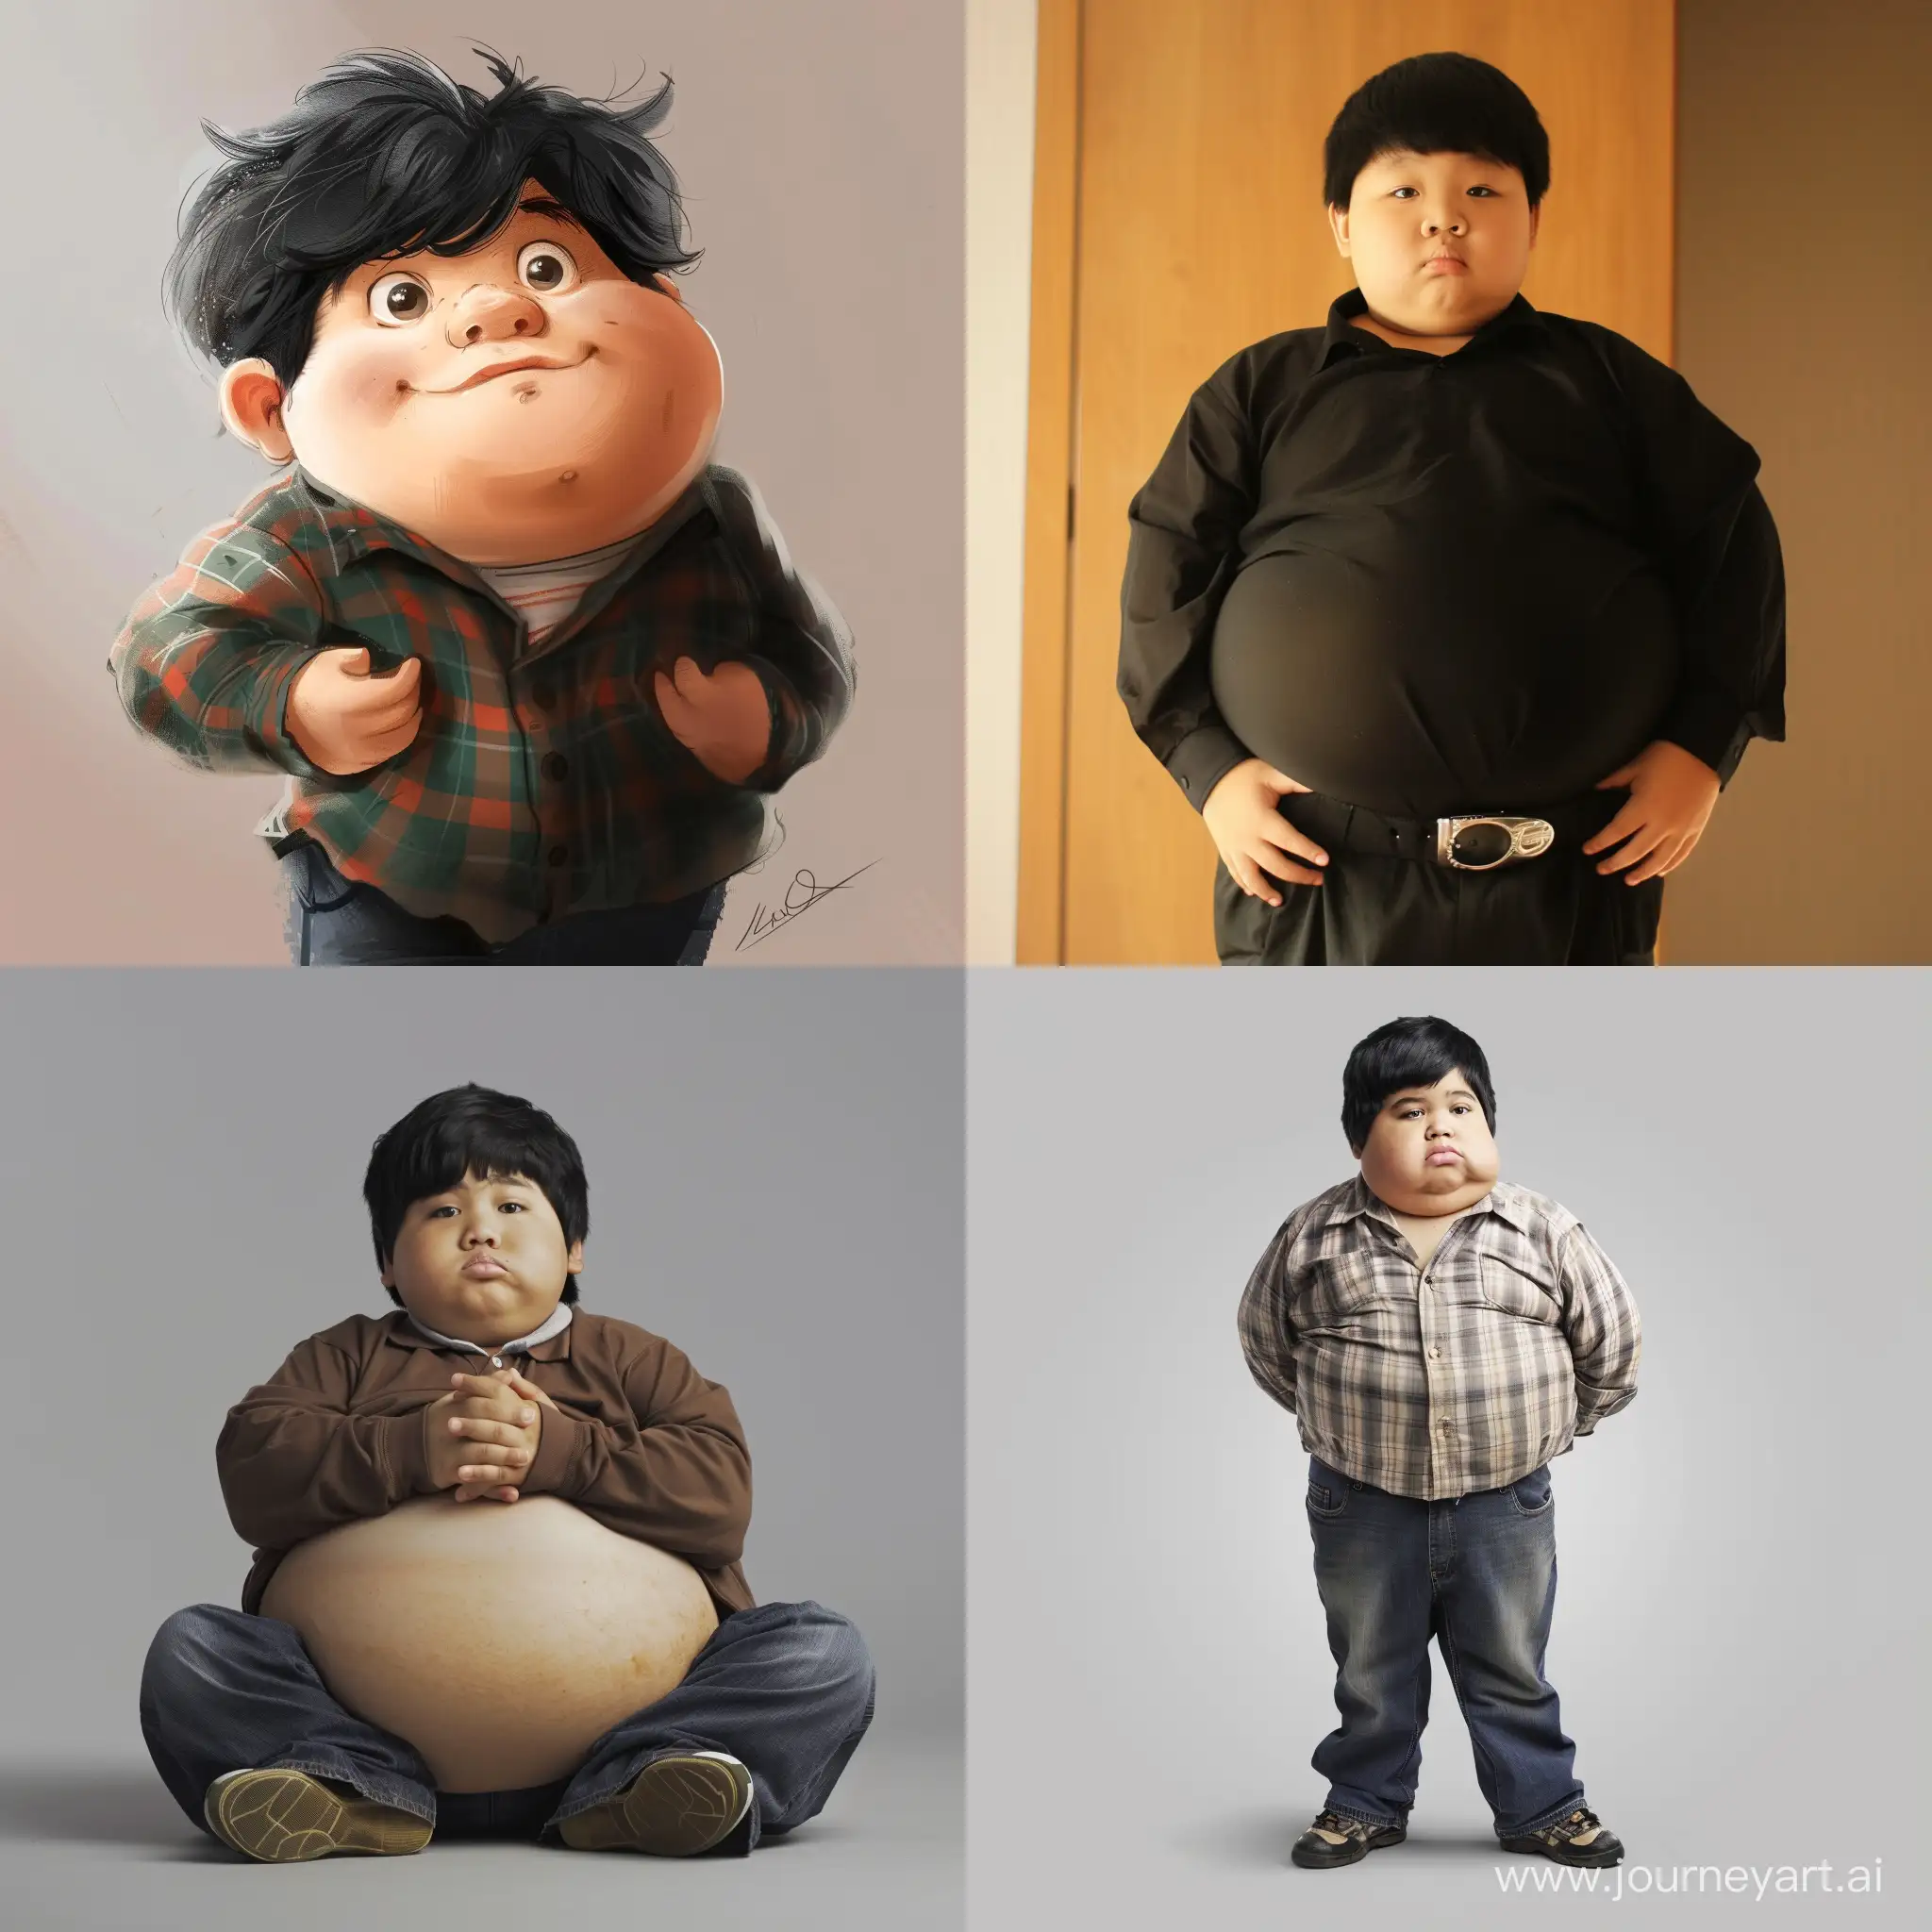 Chubby-Boy-with-Black-Hair-Celebrating-His-Uniqueness-AI-Generated-Image